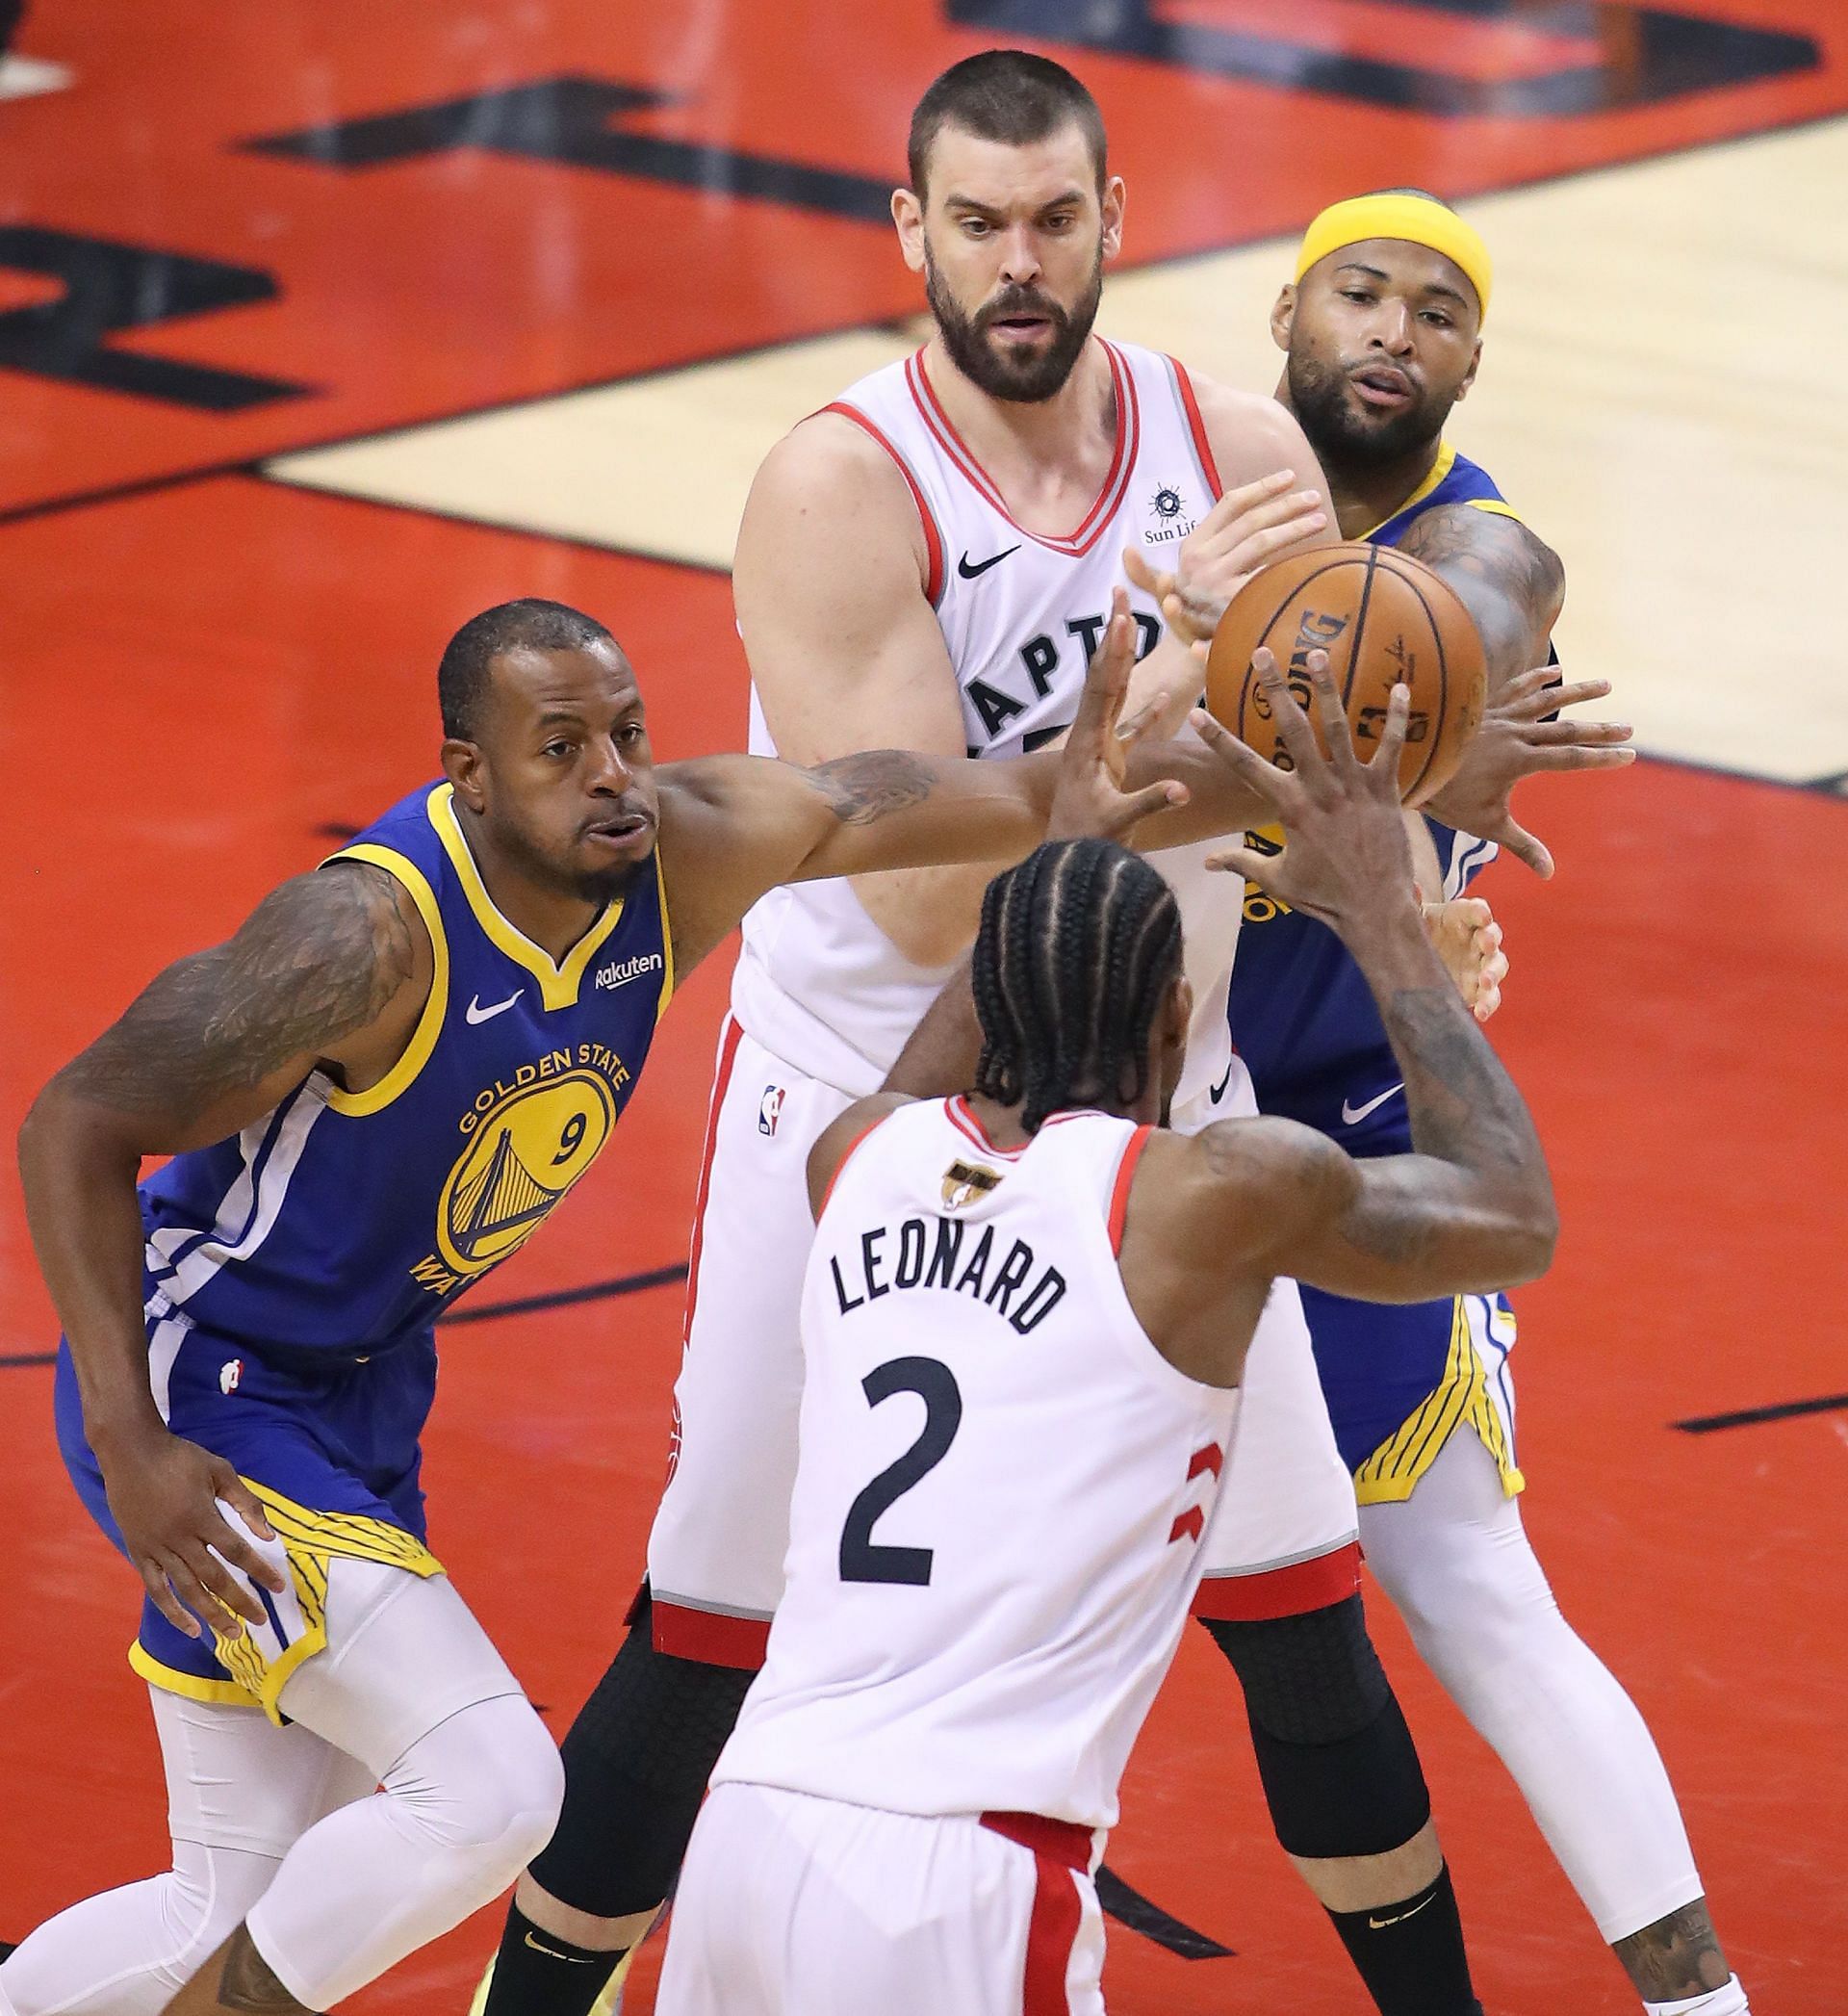 DeMarcus Cousins #0 and Andre Iguodala #9 of the Golden State Warriors battle against Marc gasol #33 and Kawhi Leonard #2 of the Toronto Raptors during Game Five of the 2019 NBA Finals at Scotiabank Arena on June 10, 2019 in Toronto, Canada.